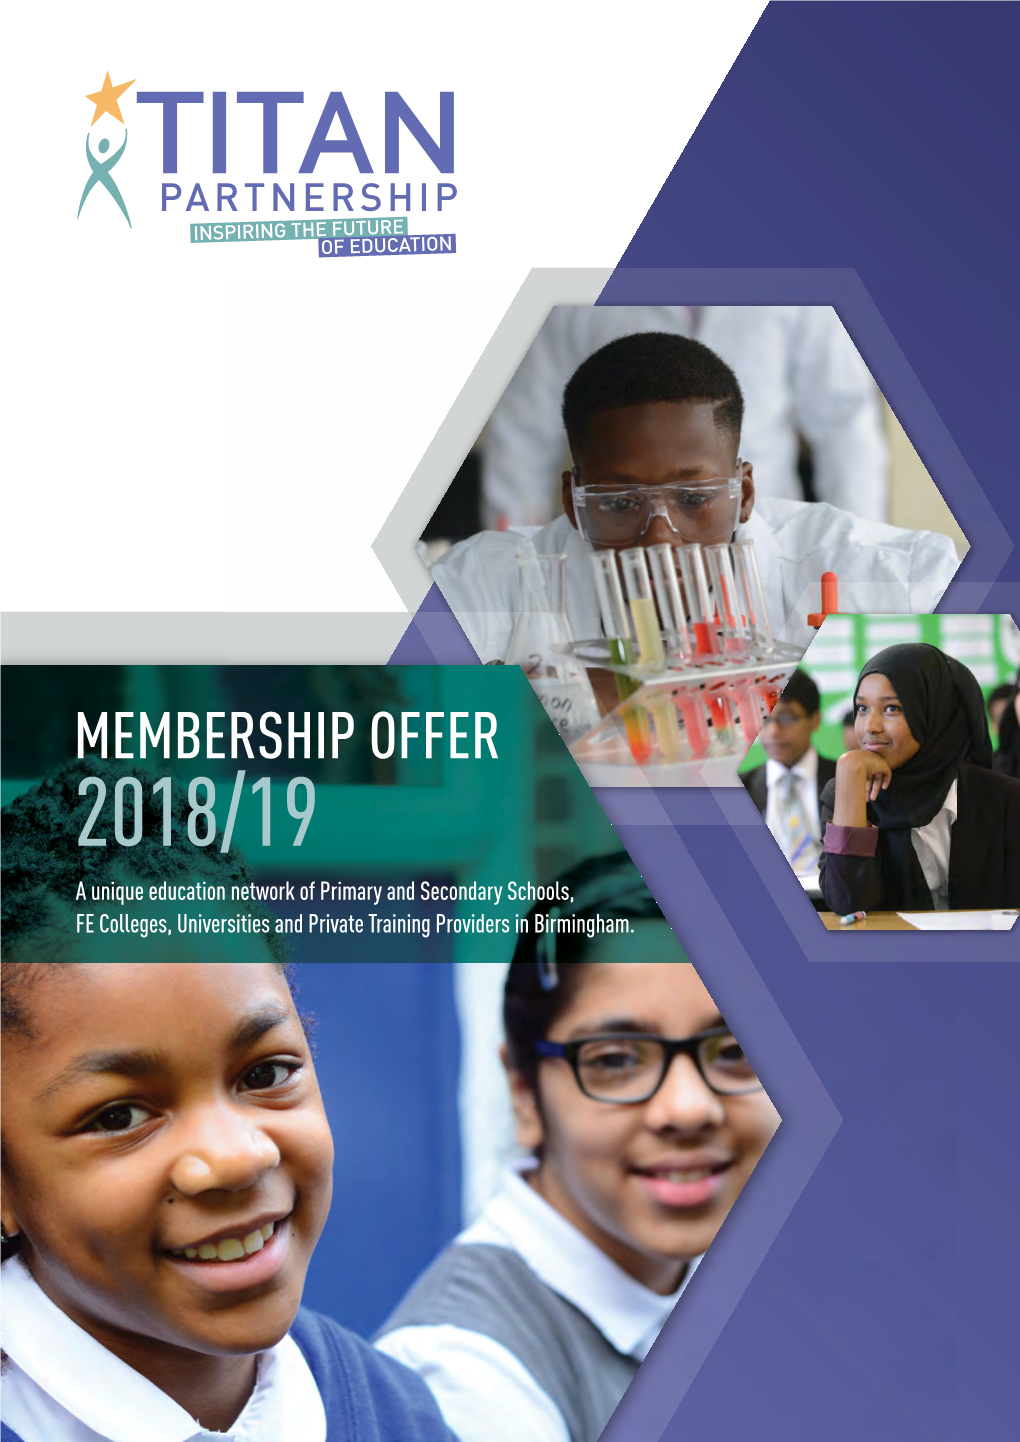 MEMBERSHIP OFFER 2018/19 a Unique Education Network of Primary and Secondary Schools, FE Colleges, Universities and Private Training Providers in Birmingham